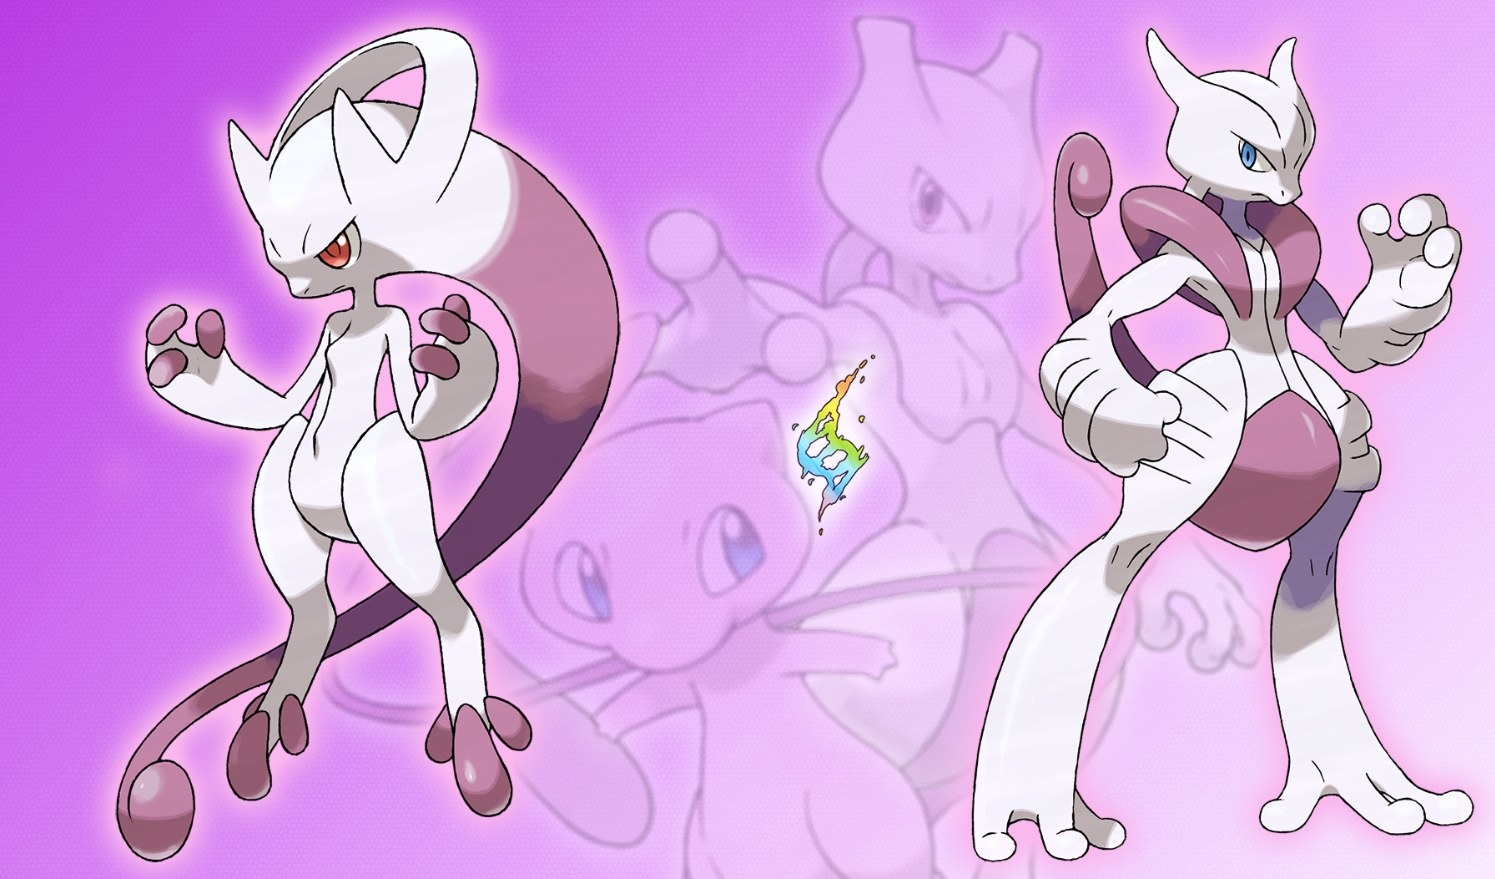 Mewtwo two mega evolutions X and Y